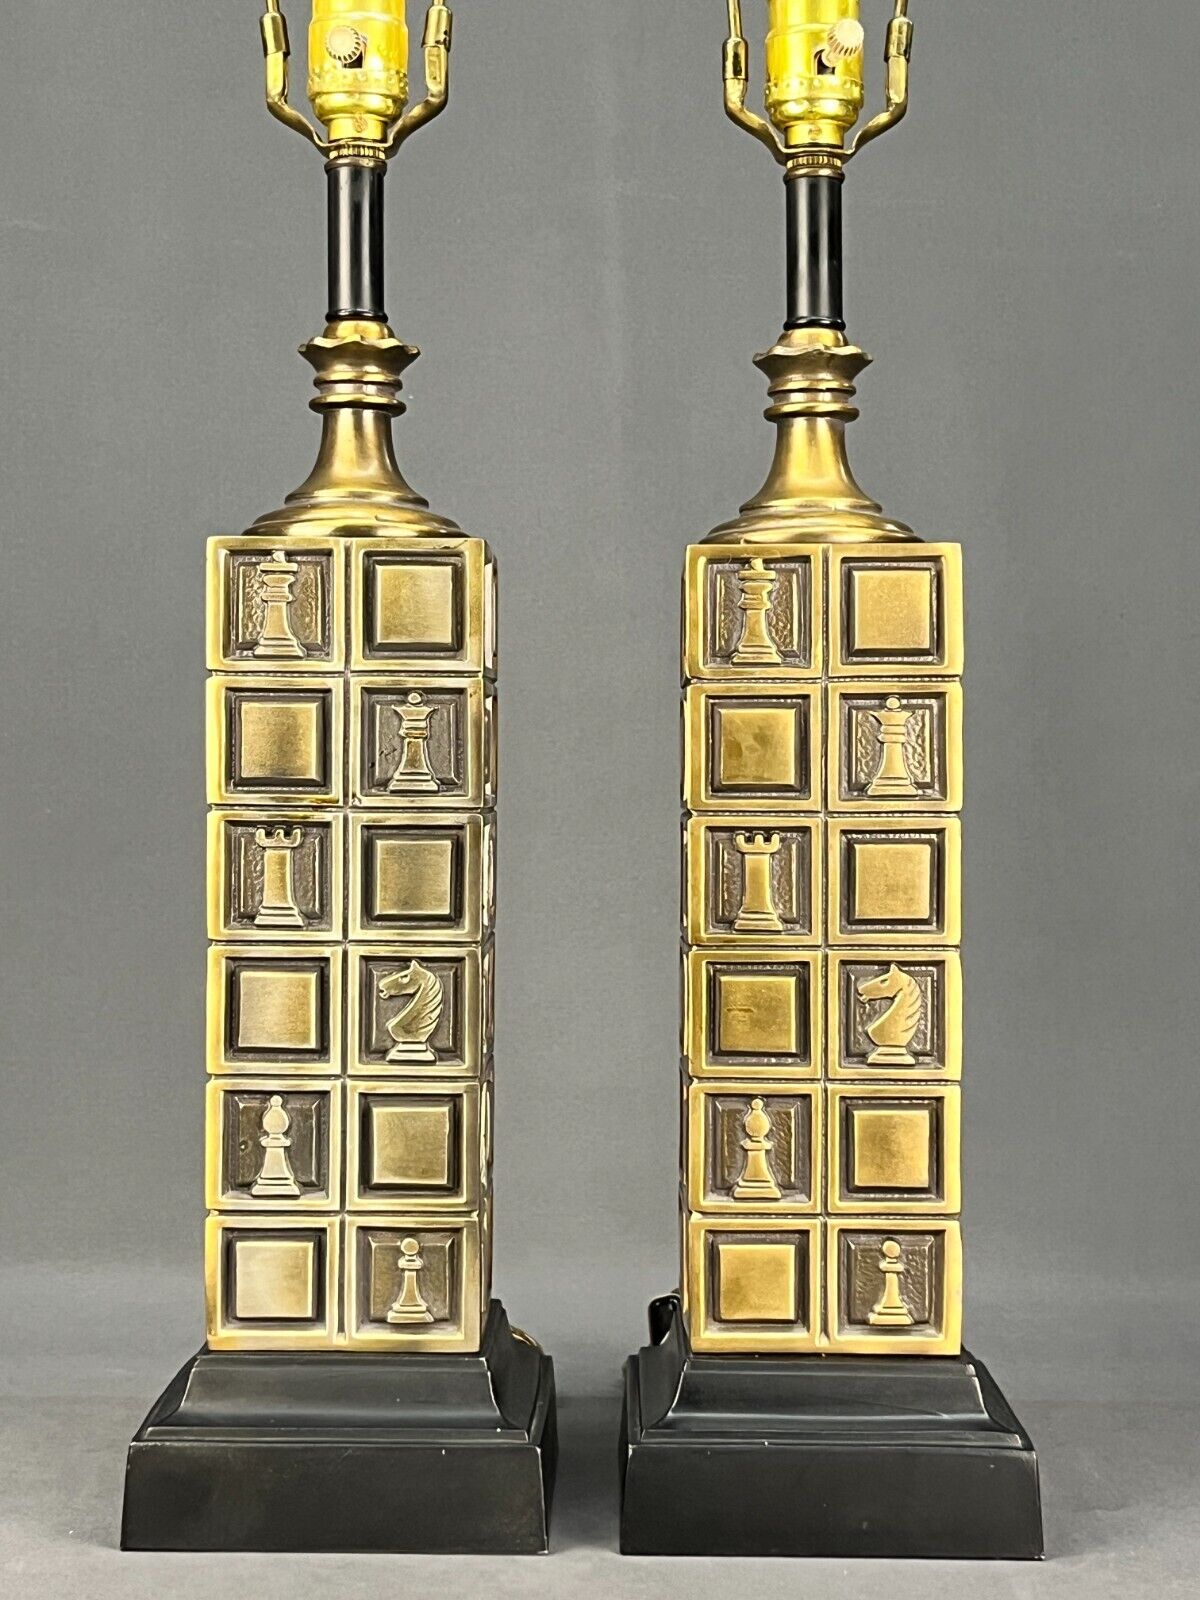 Pair of Vtg Brass Chess Piece Table Lamps by Laurel Lamp Company; 1960s